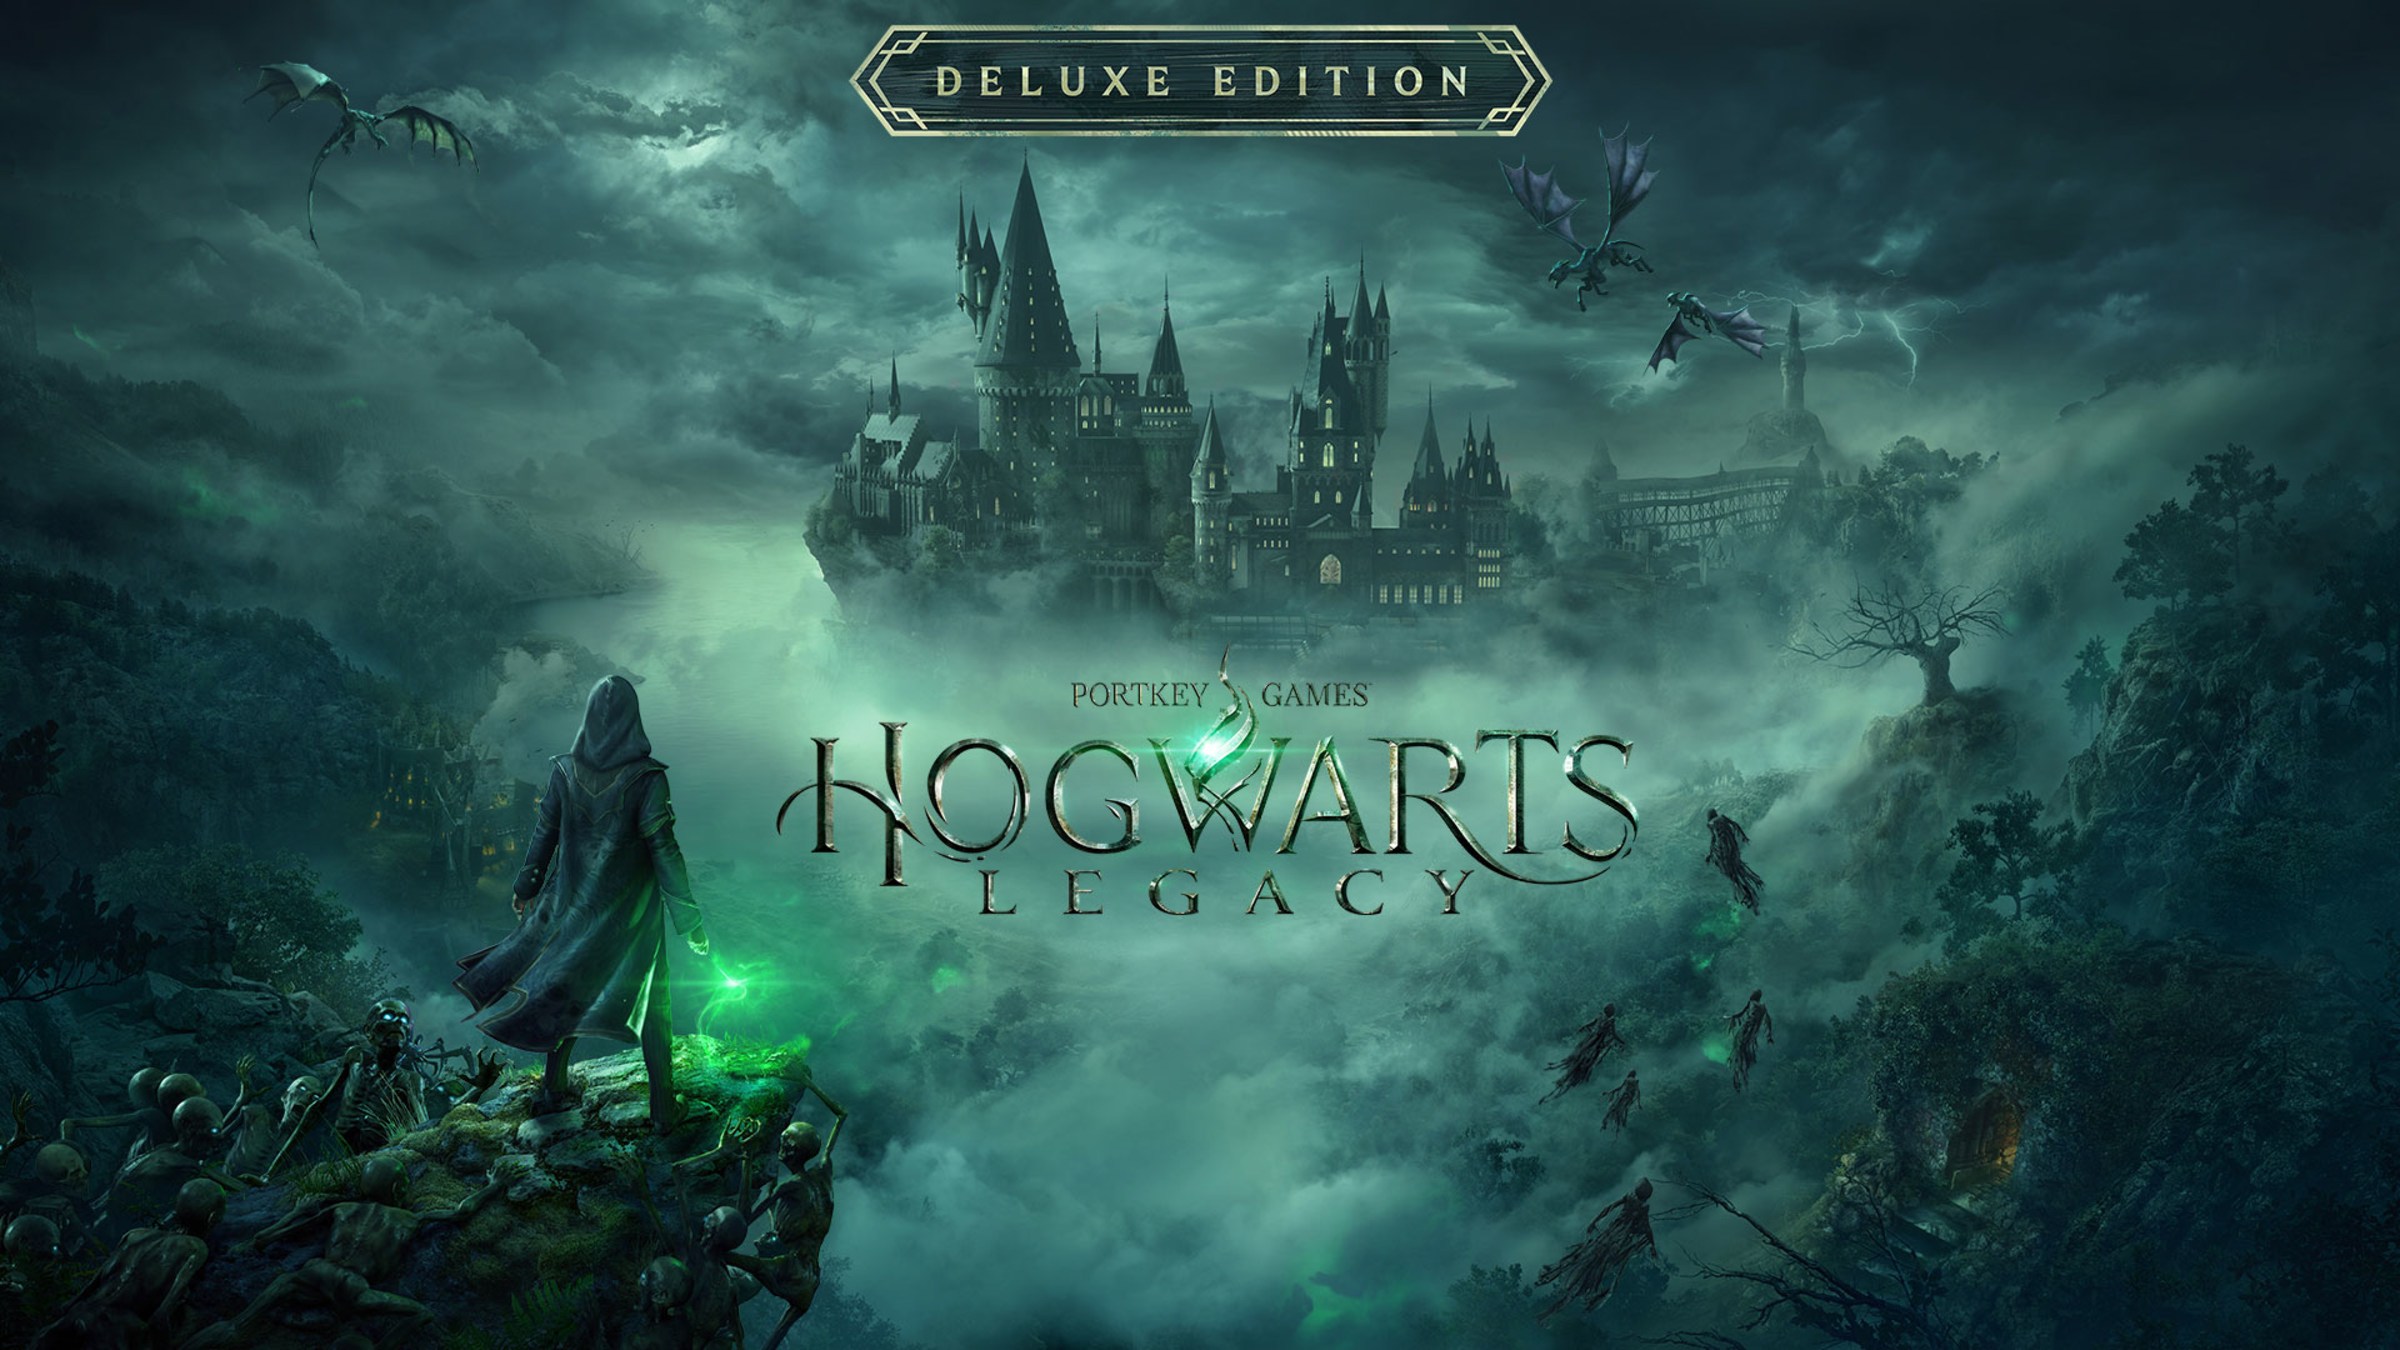 Hogwarts Legacy: Deluxe Edition' for Nintendo Switch: Buy It Online.